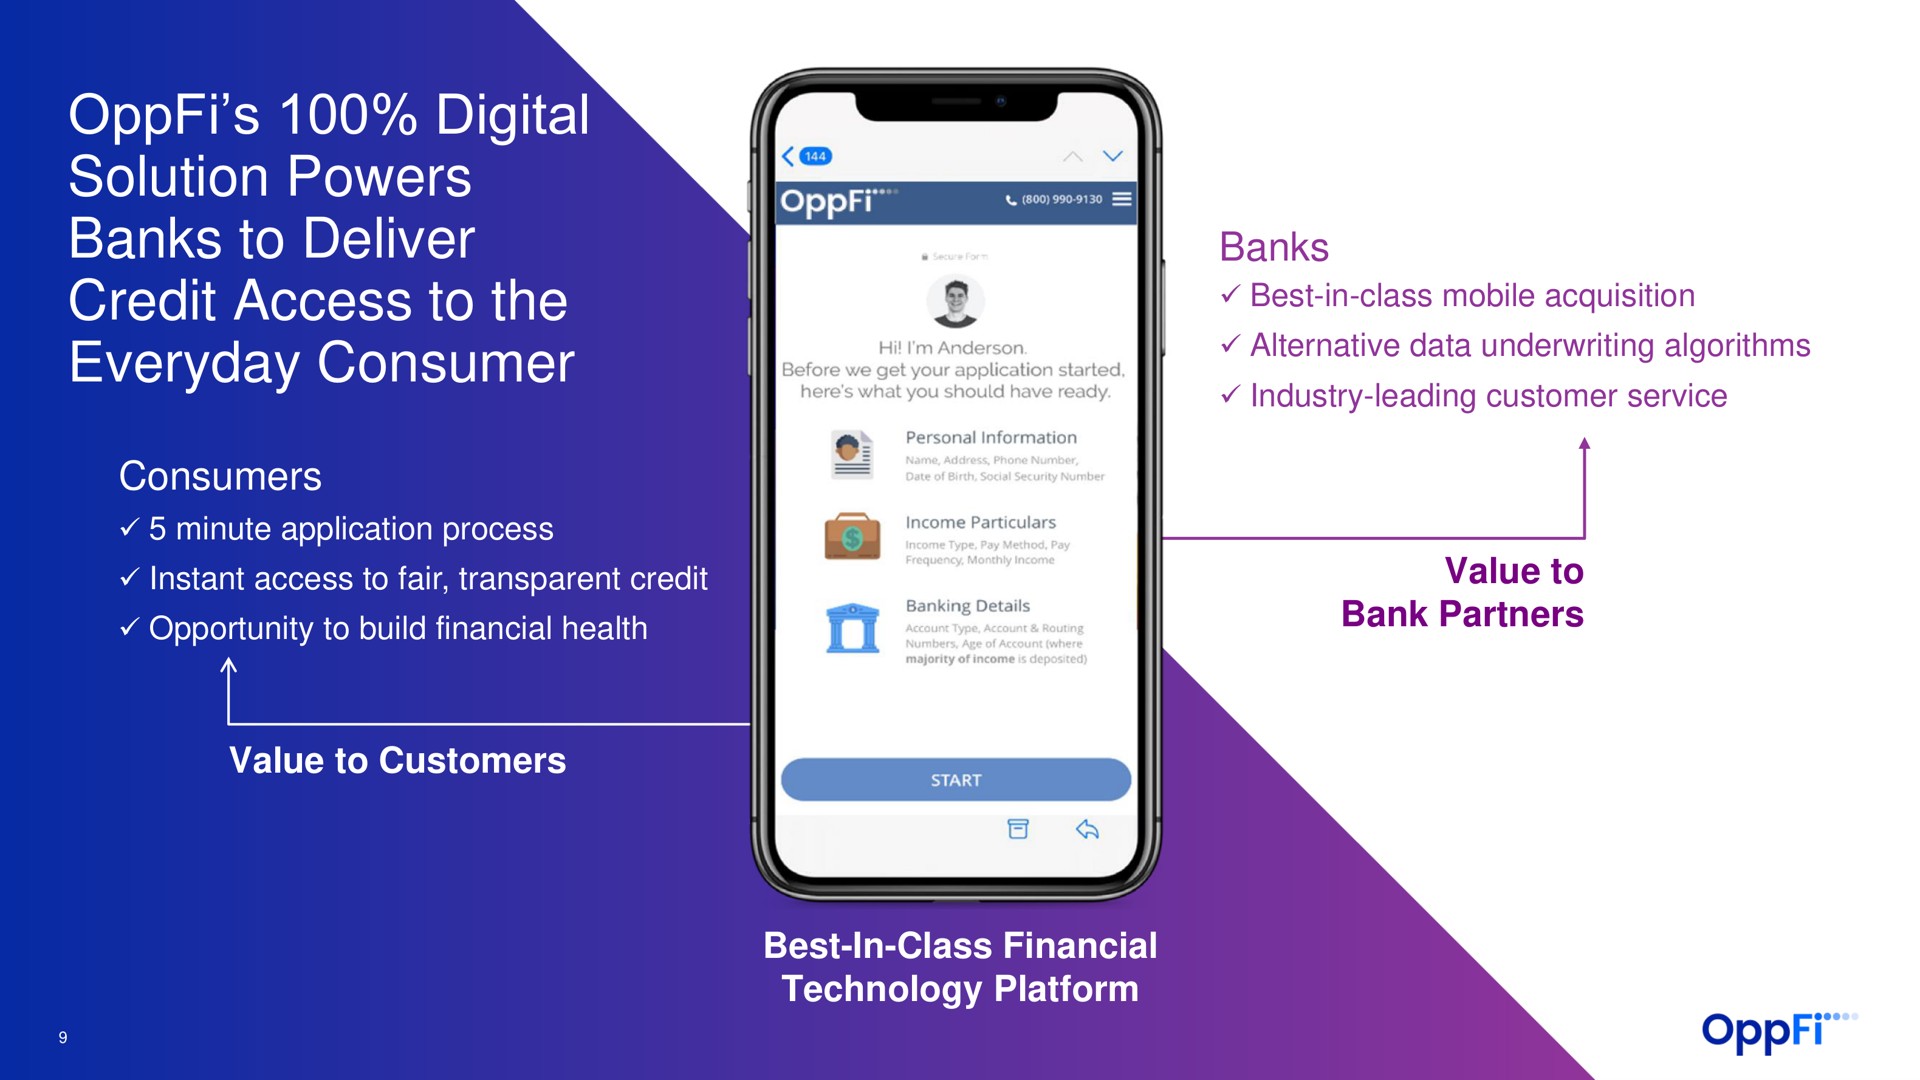 digital solution powers banks to deliver credit access to the everyday consumer consumers minute application process instant access to fair transparent credit opportunity to build financial health value to customers banks best in class mobile acquisition alternative data underwriting algorithms industry leading customer service value to bank partners best in class financial technology platform a | OppFi